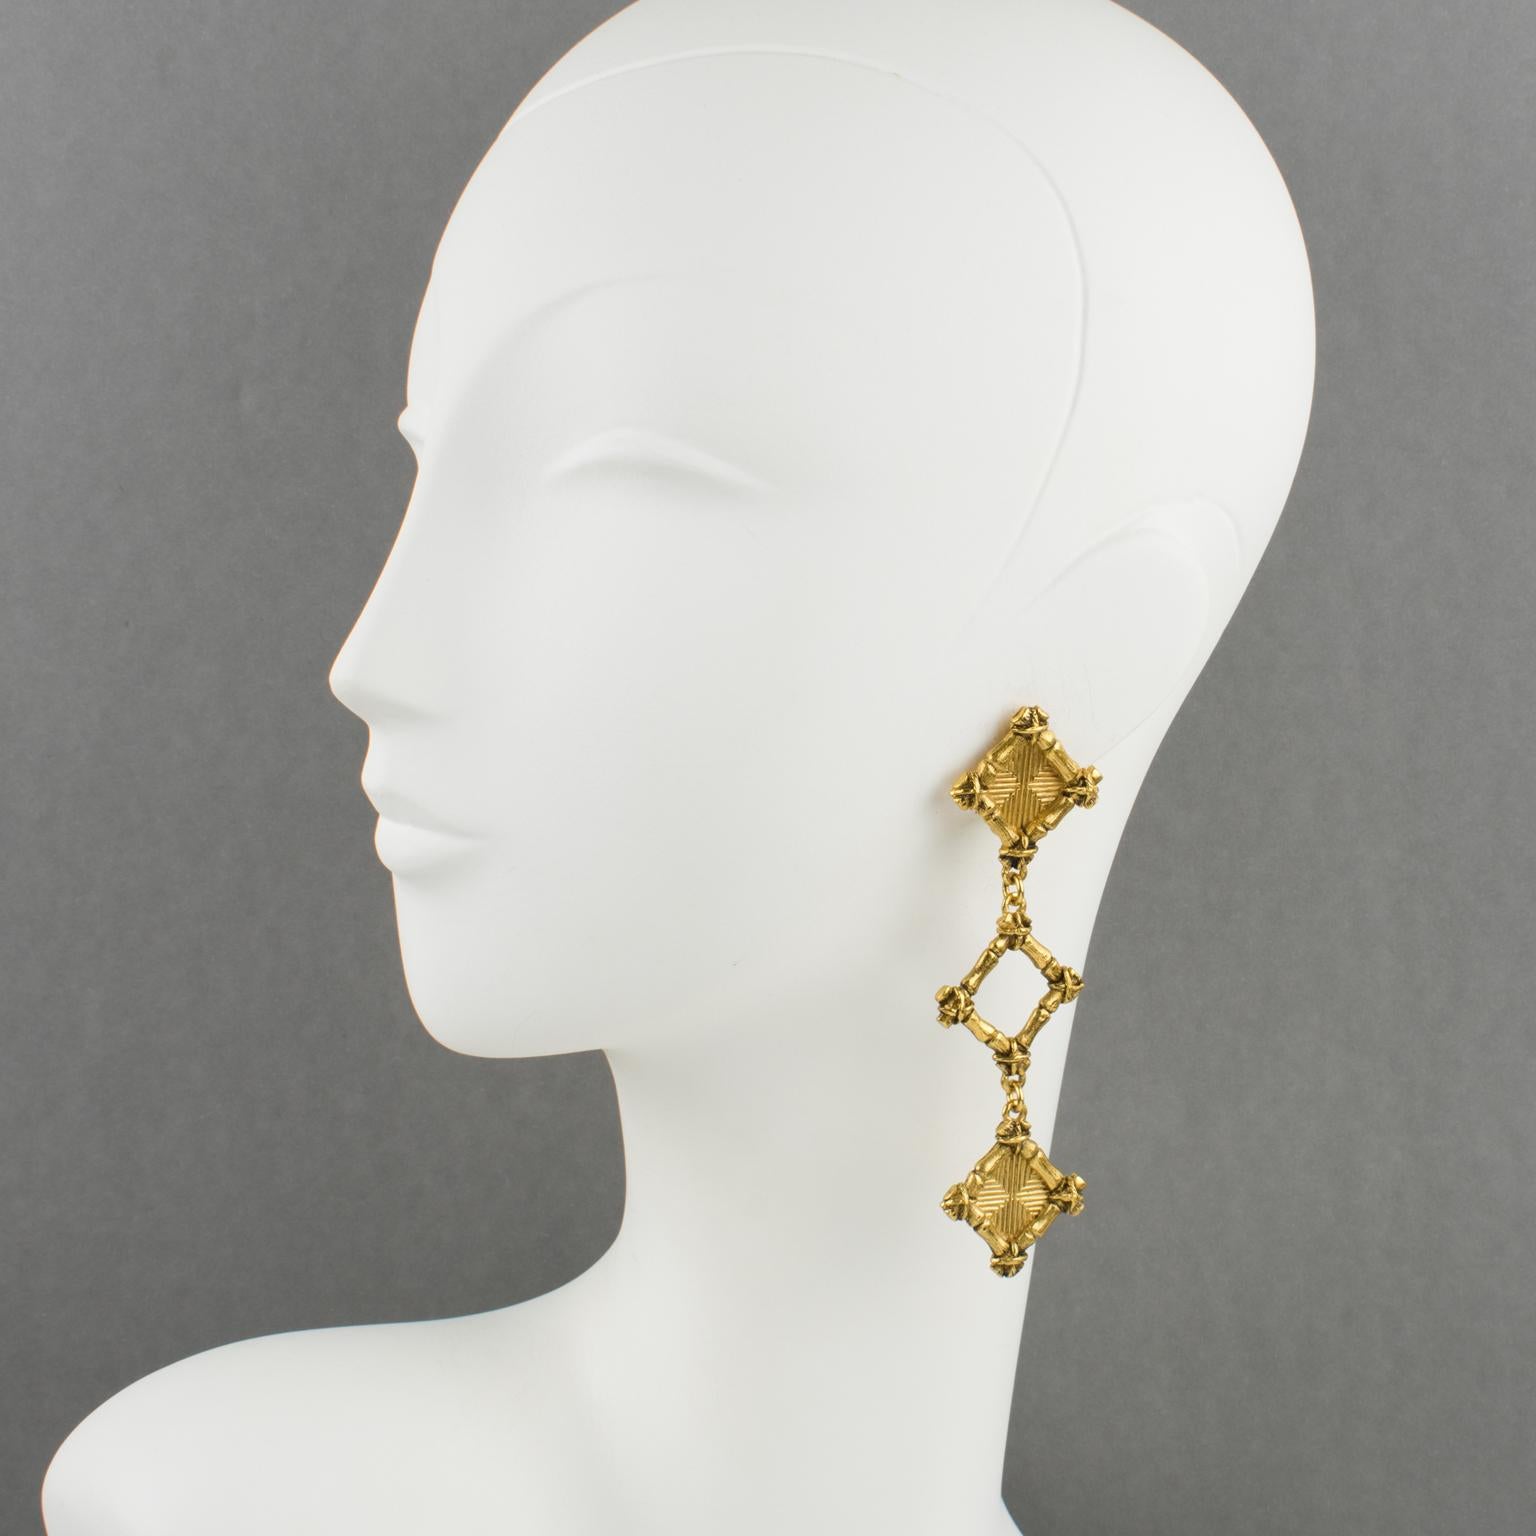 Lovely Rochas Paris dangling clip-on earrings. Long drop design, with carved and textured gilt metal geometric elements. Signed at the back with engraved logo: 